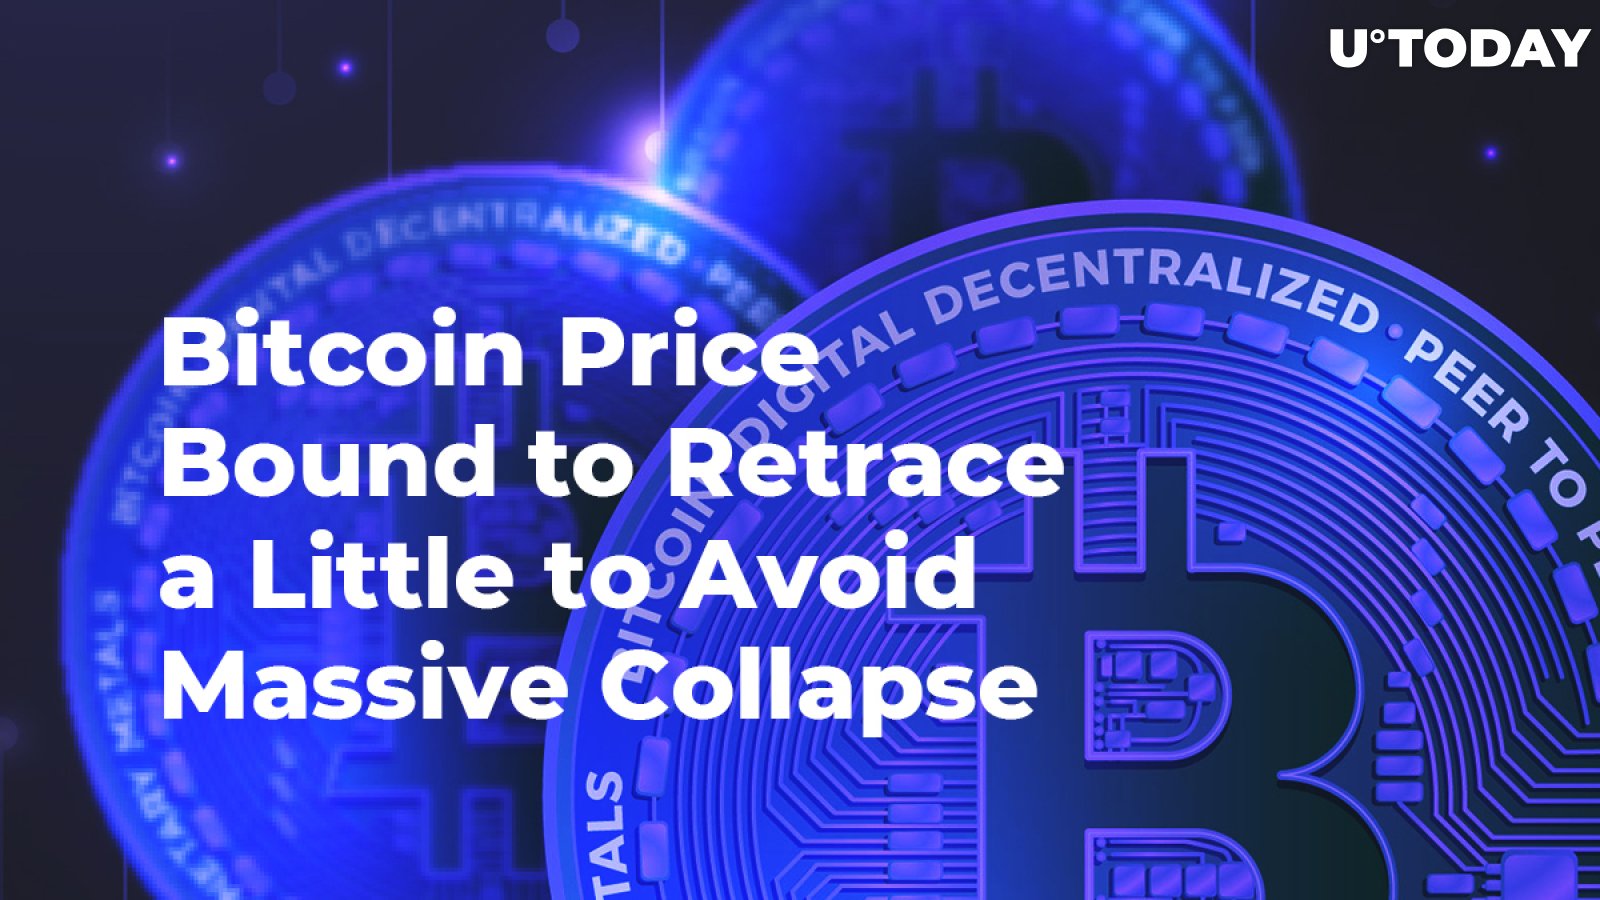 Bitcoin Price Bound to Retrace a Little to Avoid Massive Collapse: Expert Says